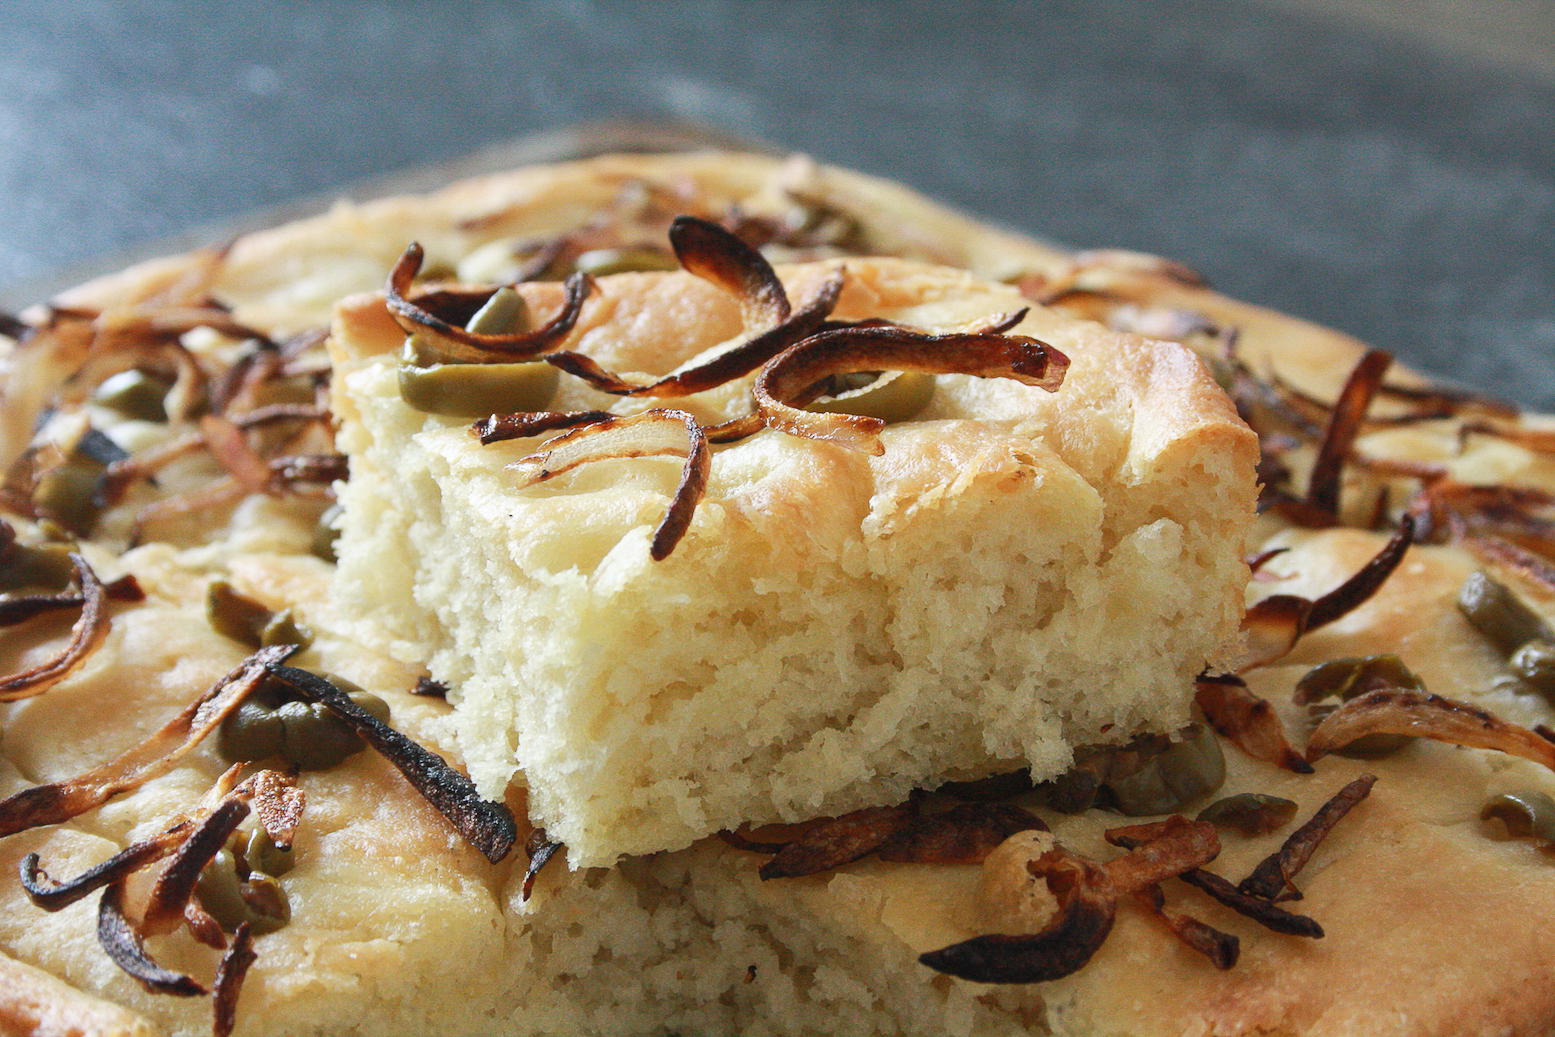 Super easy, soft and fluffy homemade focaccia with lots of olive oil!